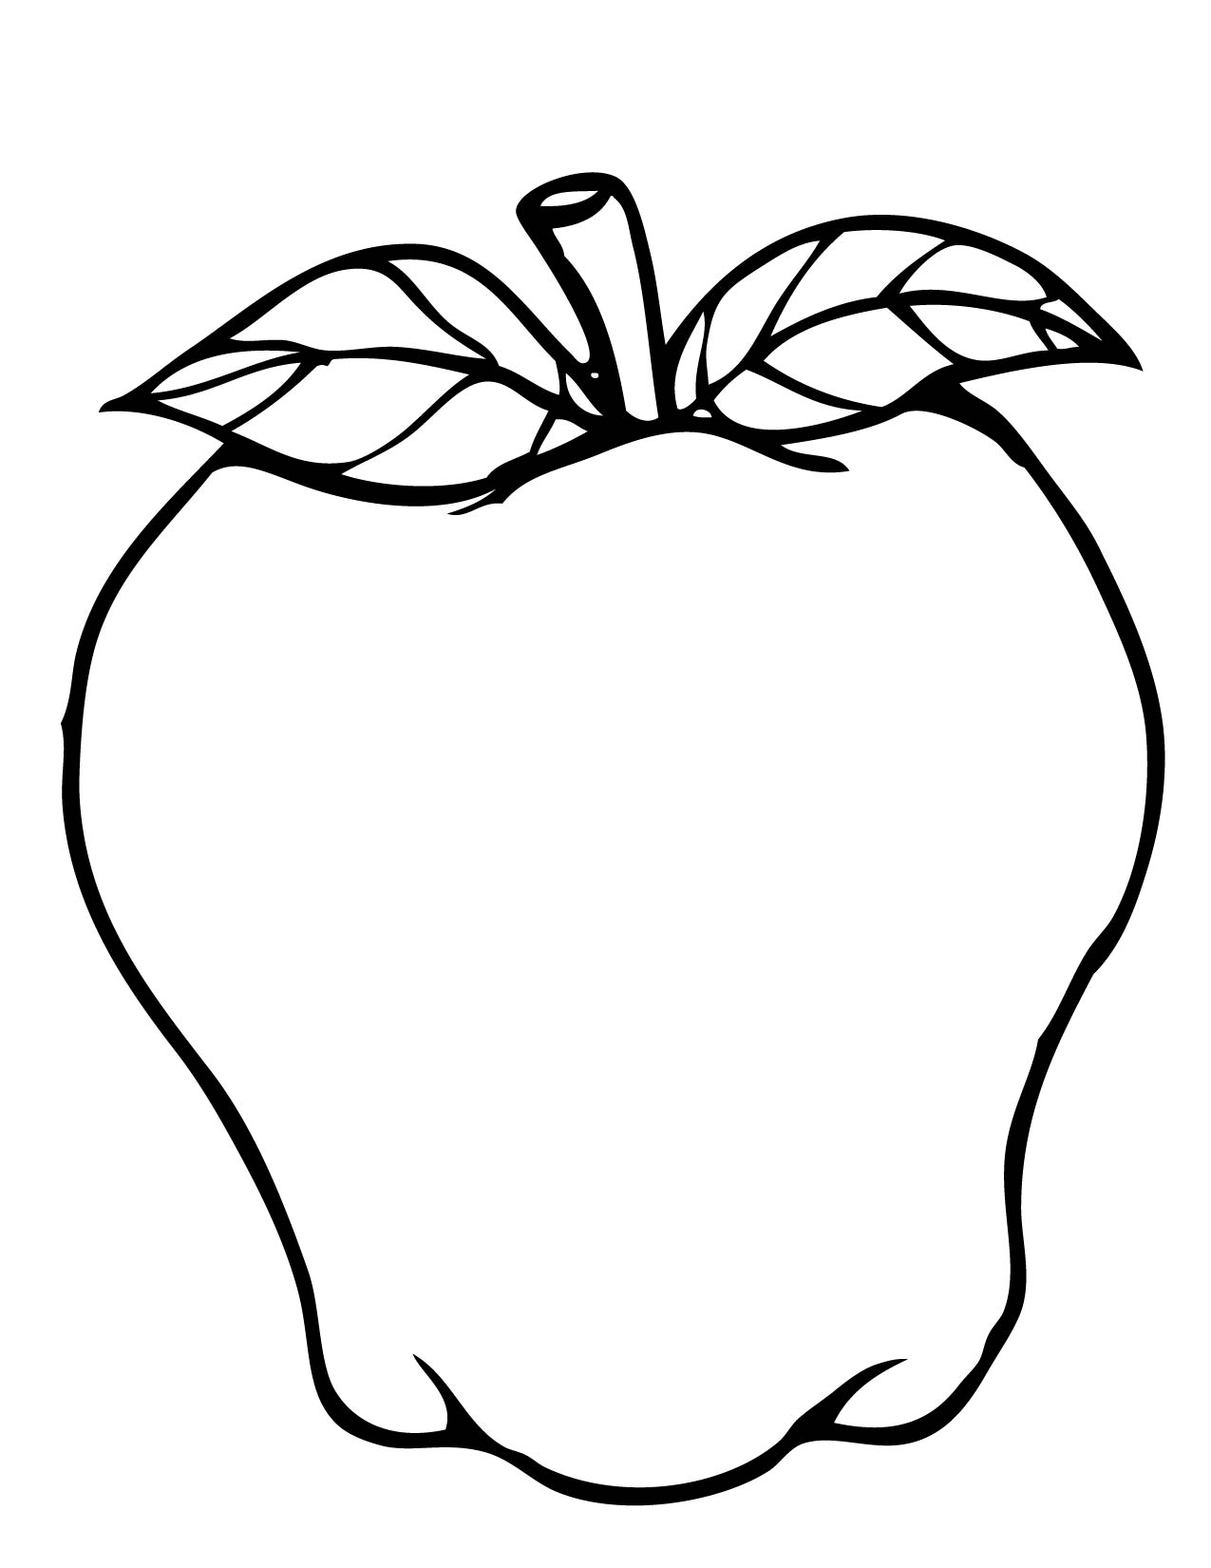 Printable Apple Coloring Pages Apple Coloring Page With Wallpaper Hd For Iphone Fun Time